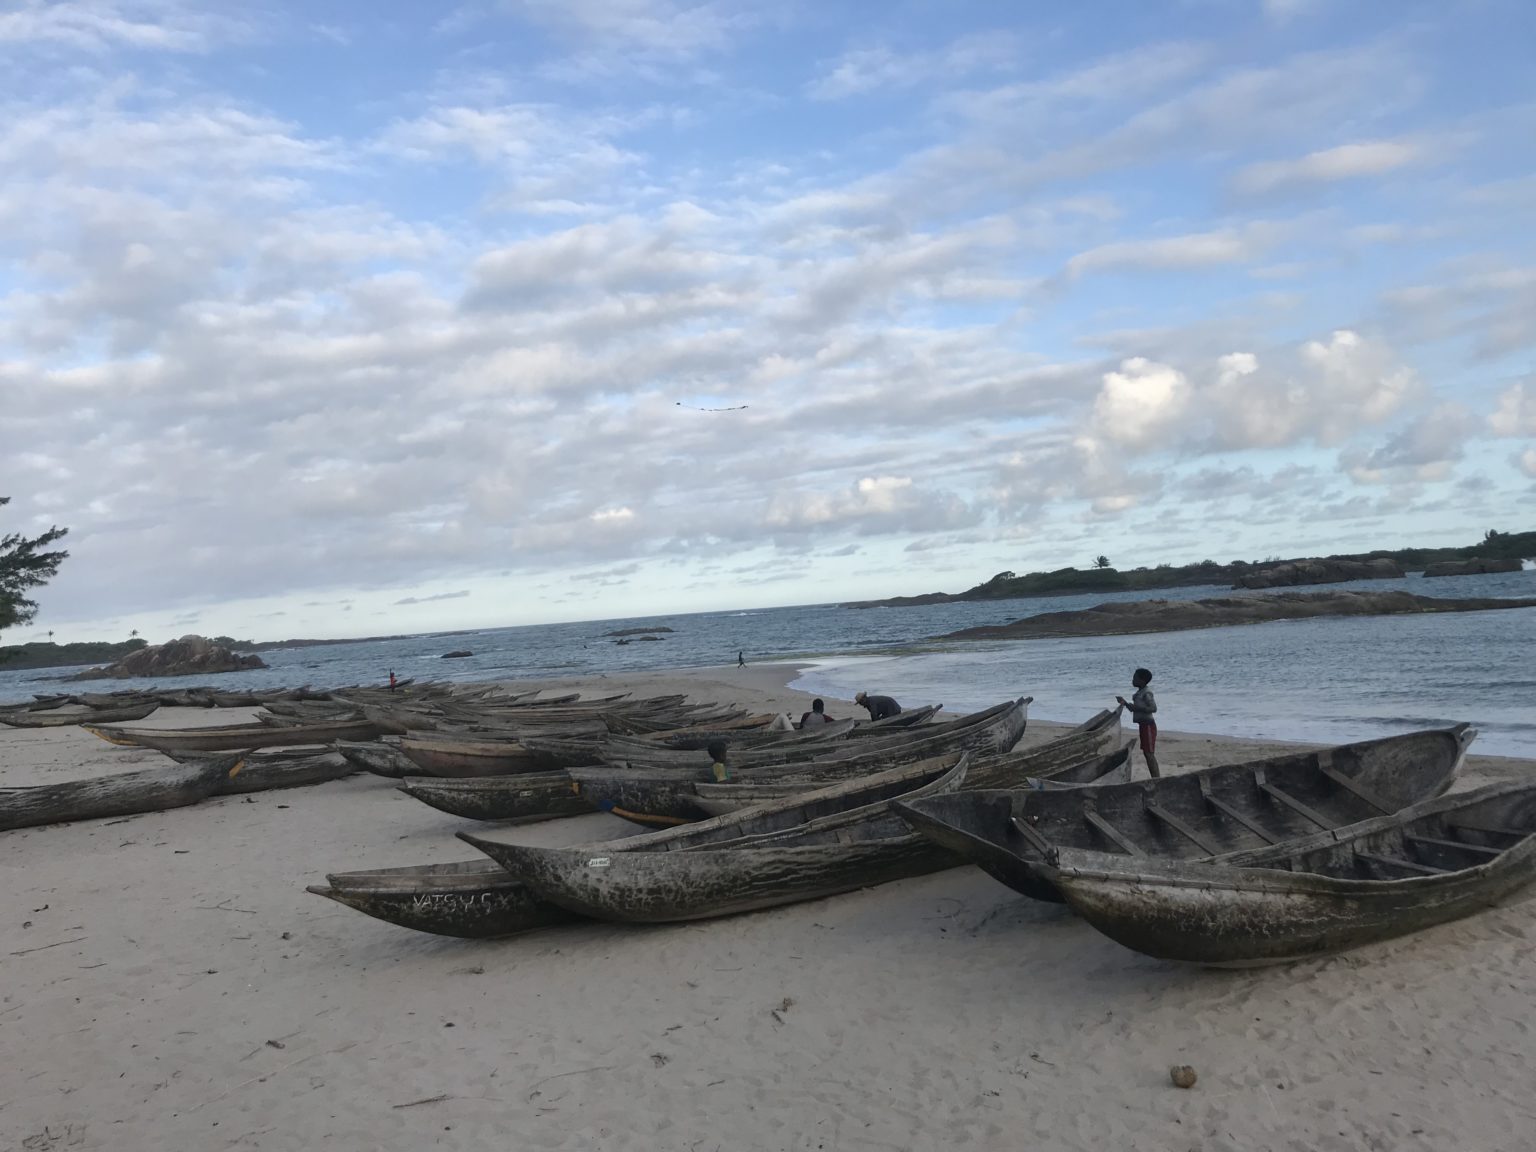 Madagascar, wooden canoes on beach on sunny day at Manifiafy Village